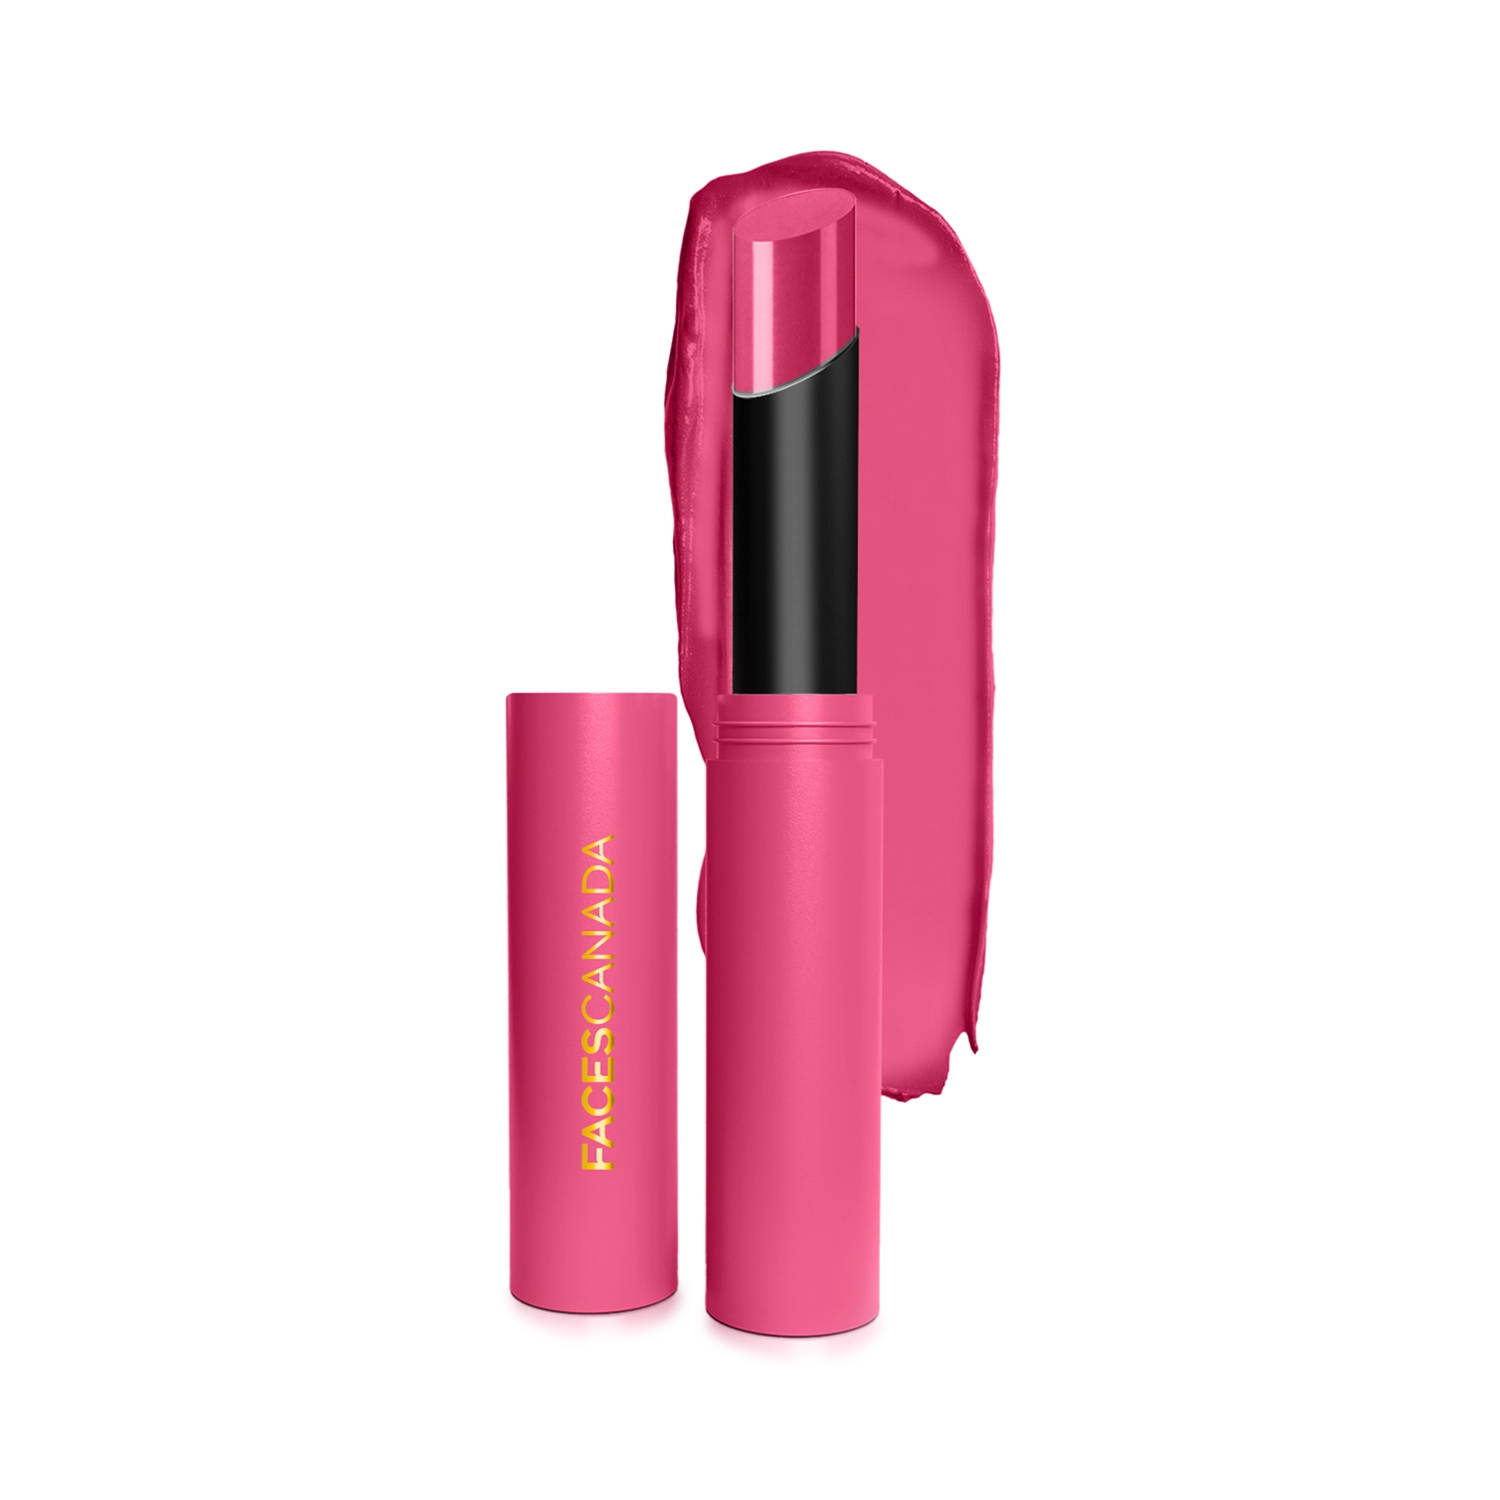 Faces Canada | Faces Canada 3-In-1 Long Stay Matte Lipstick - 04 Bubblegum Pink (2g)